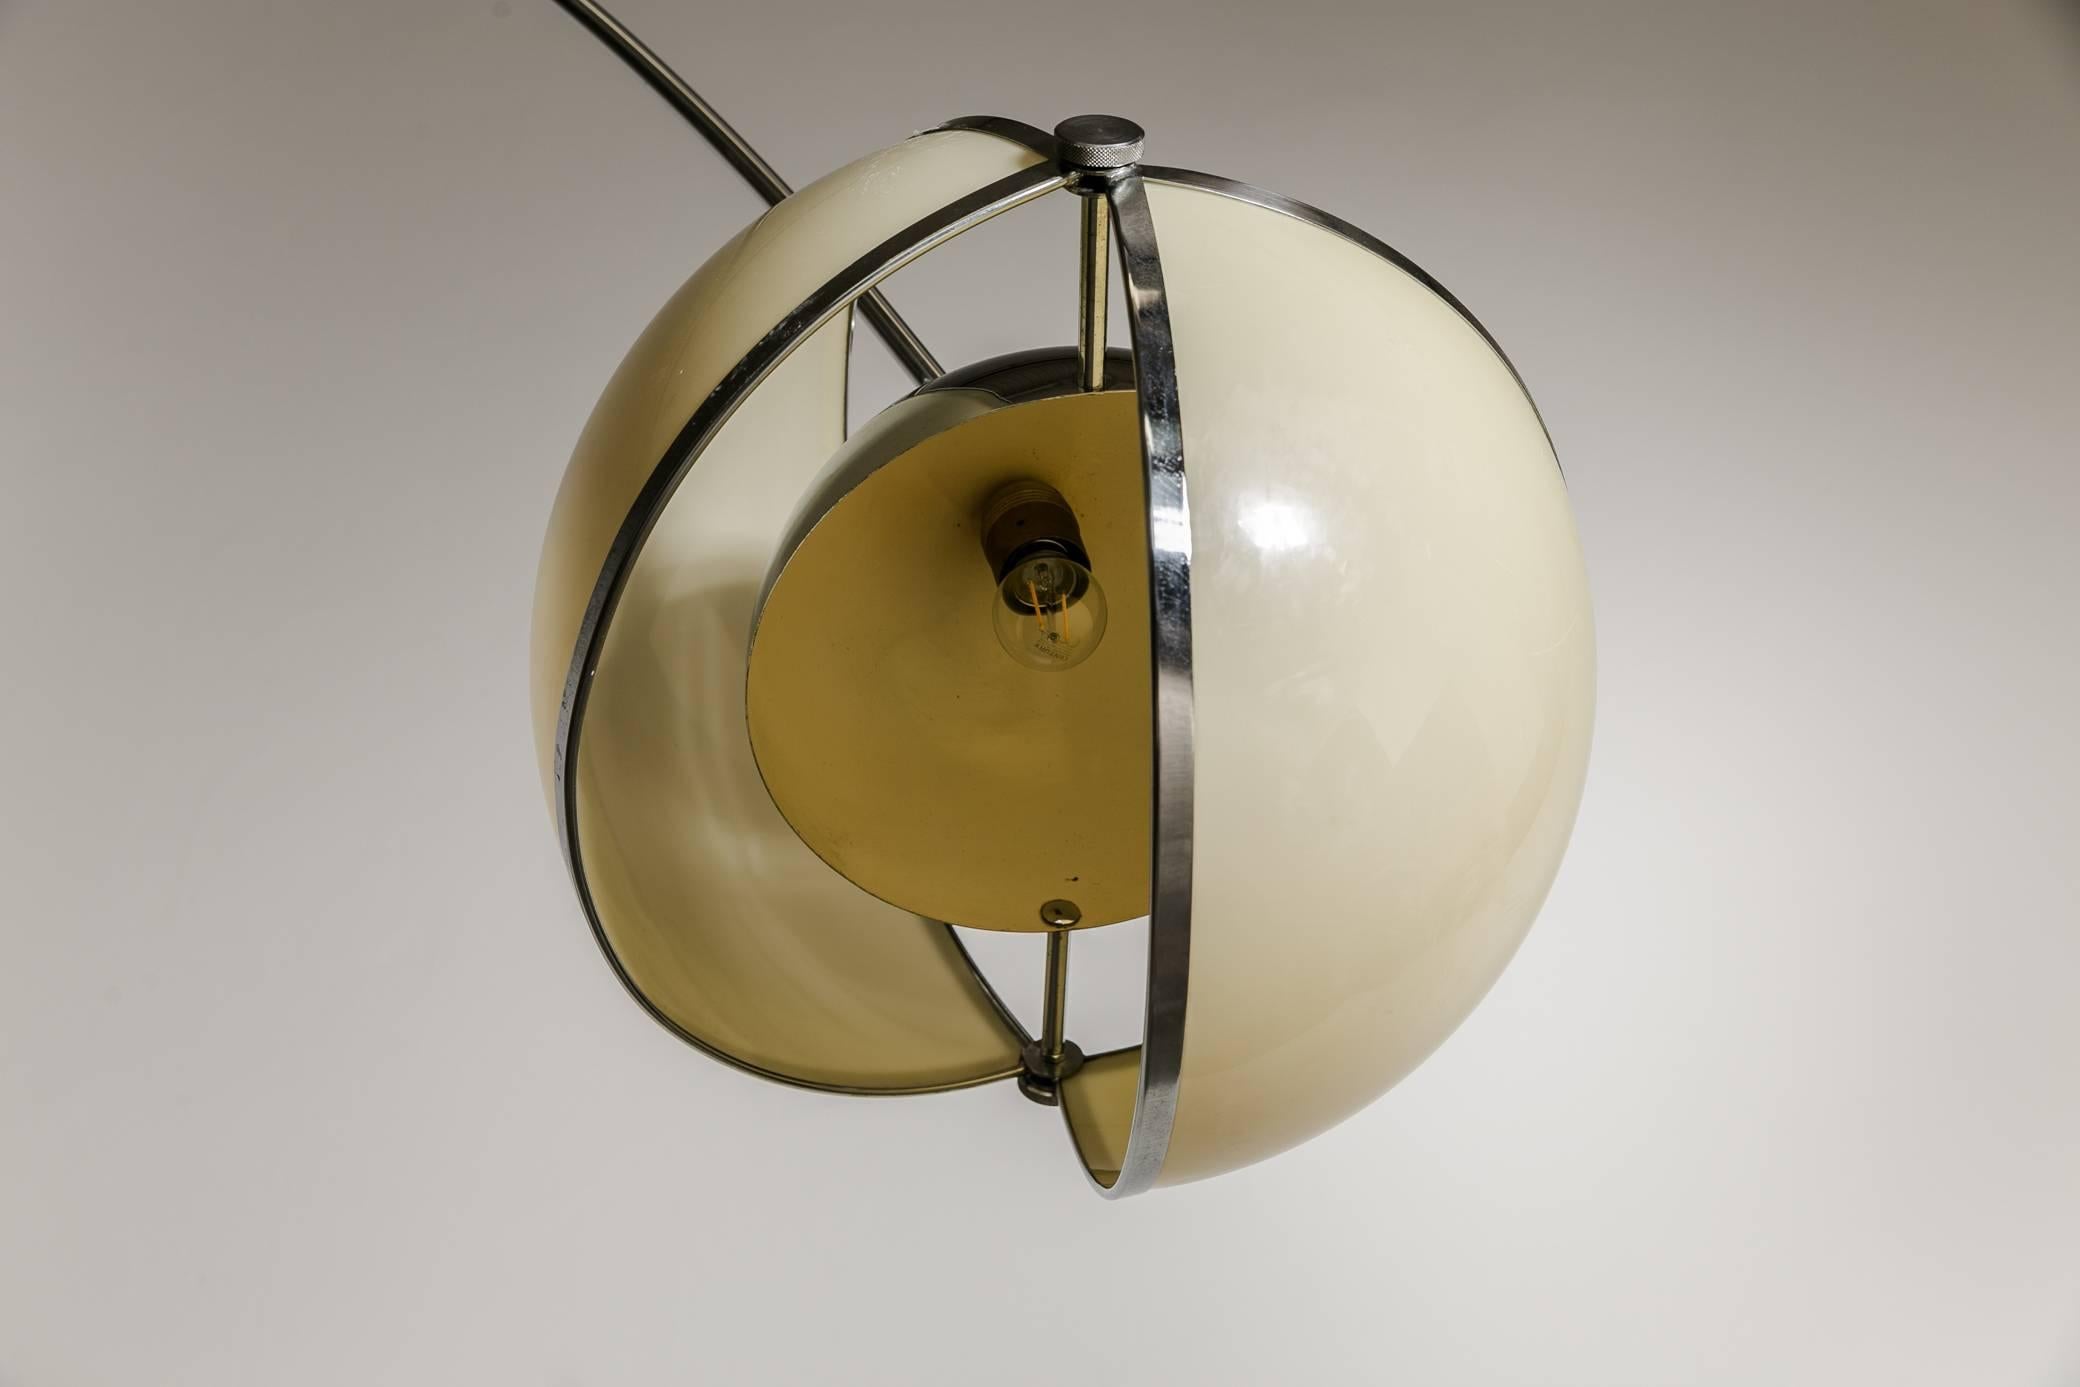 Plexiglass Oolok/Molok Arco Lamp In the style of  Superstudio, 1968, Italy